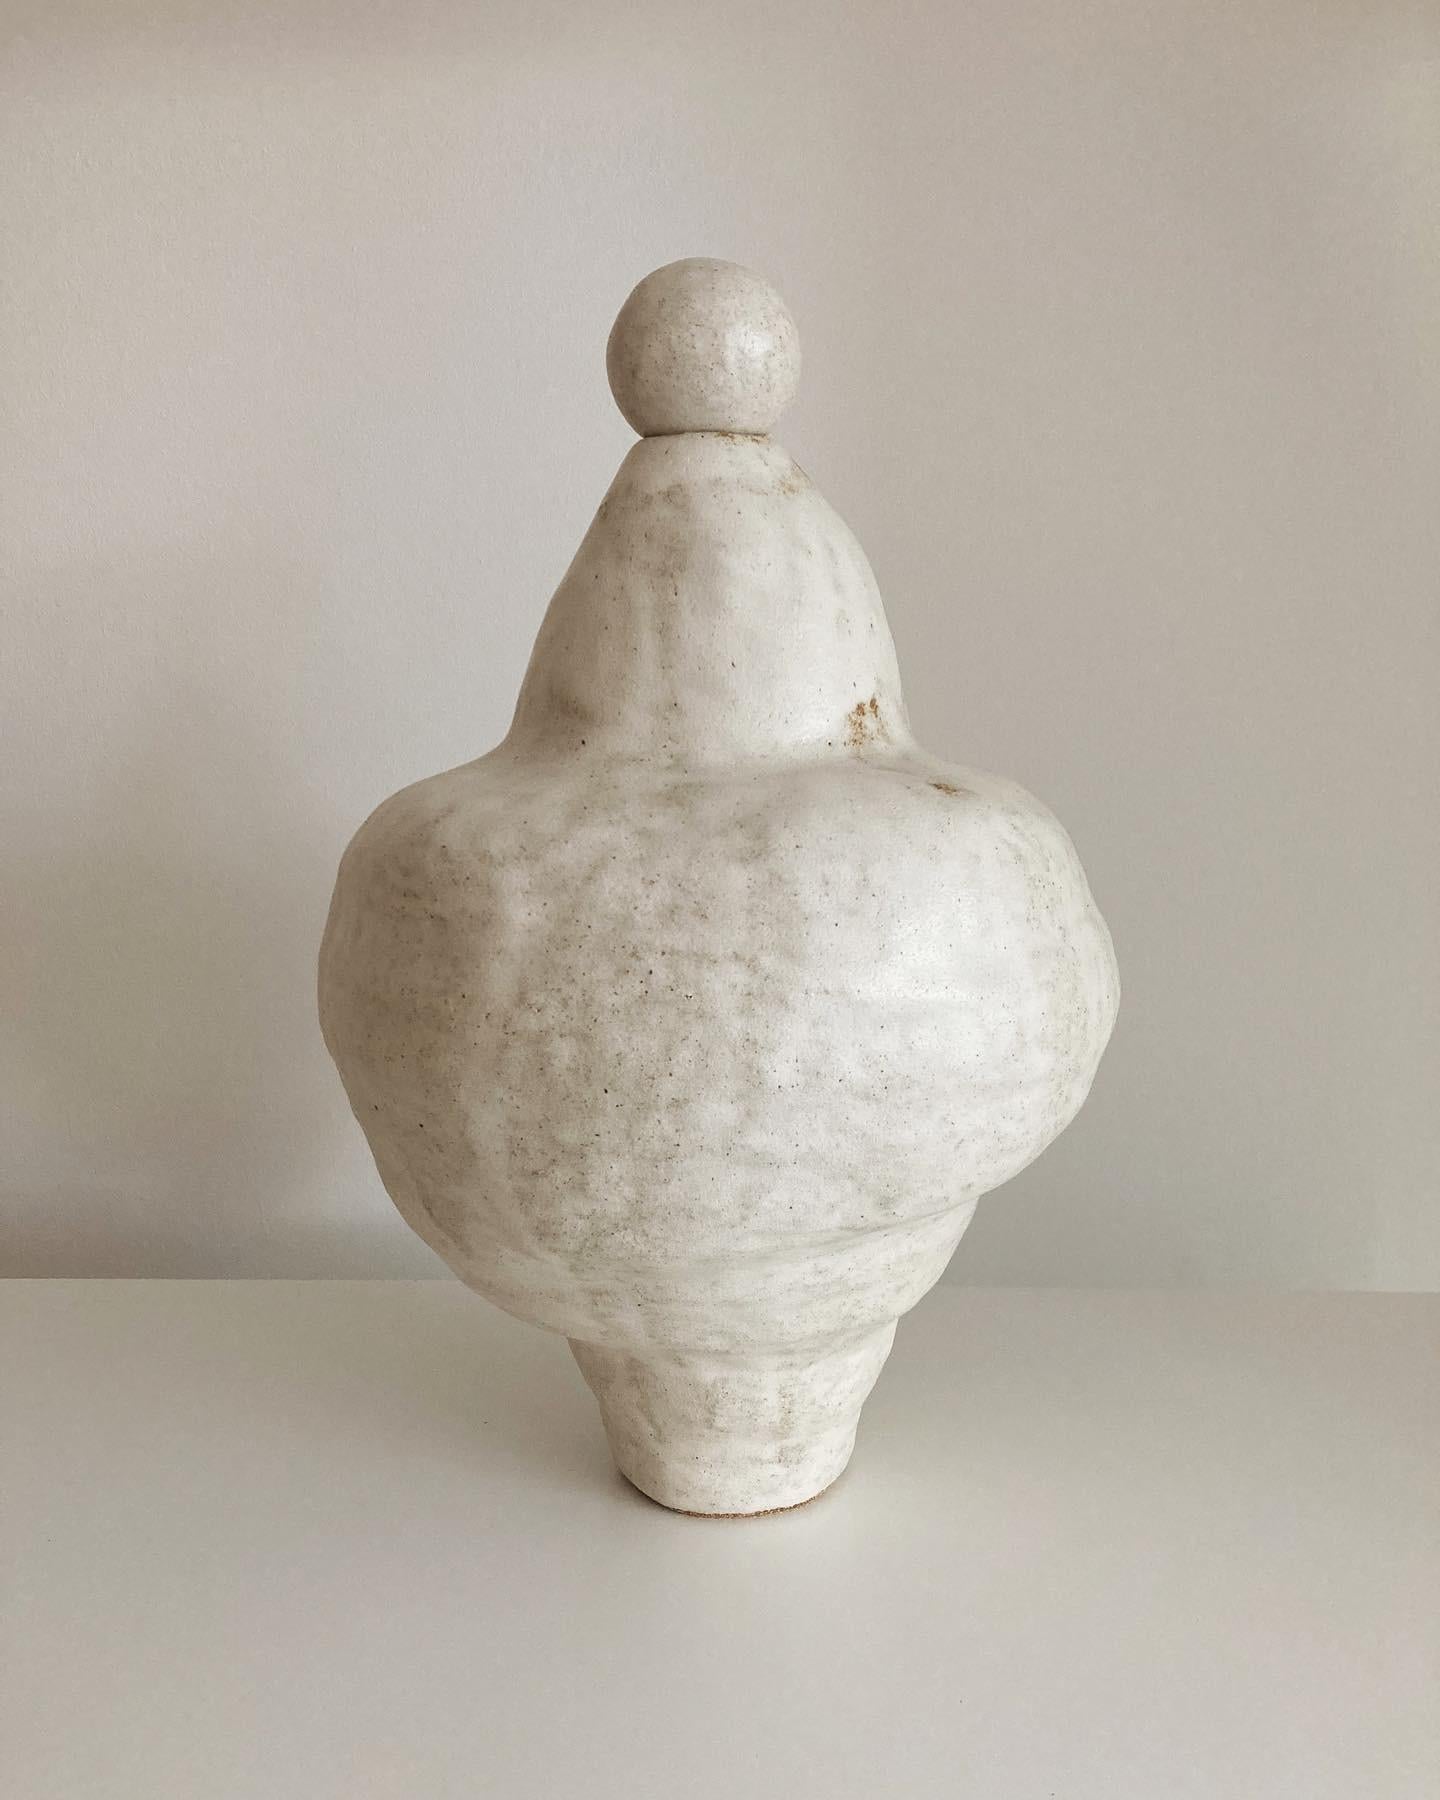 No.96 stoneware sculpture, Tonfisk by Ciona Lee 
One of a Kind
Dimensions: Ø 20 x H 28 cm
Materials: Grogged Stoneware, Satin Cream Glaze
Variations of size and colour available.

Tonfisk is the ceramic practice by Ciona Lee, a Korean-Italian